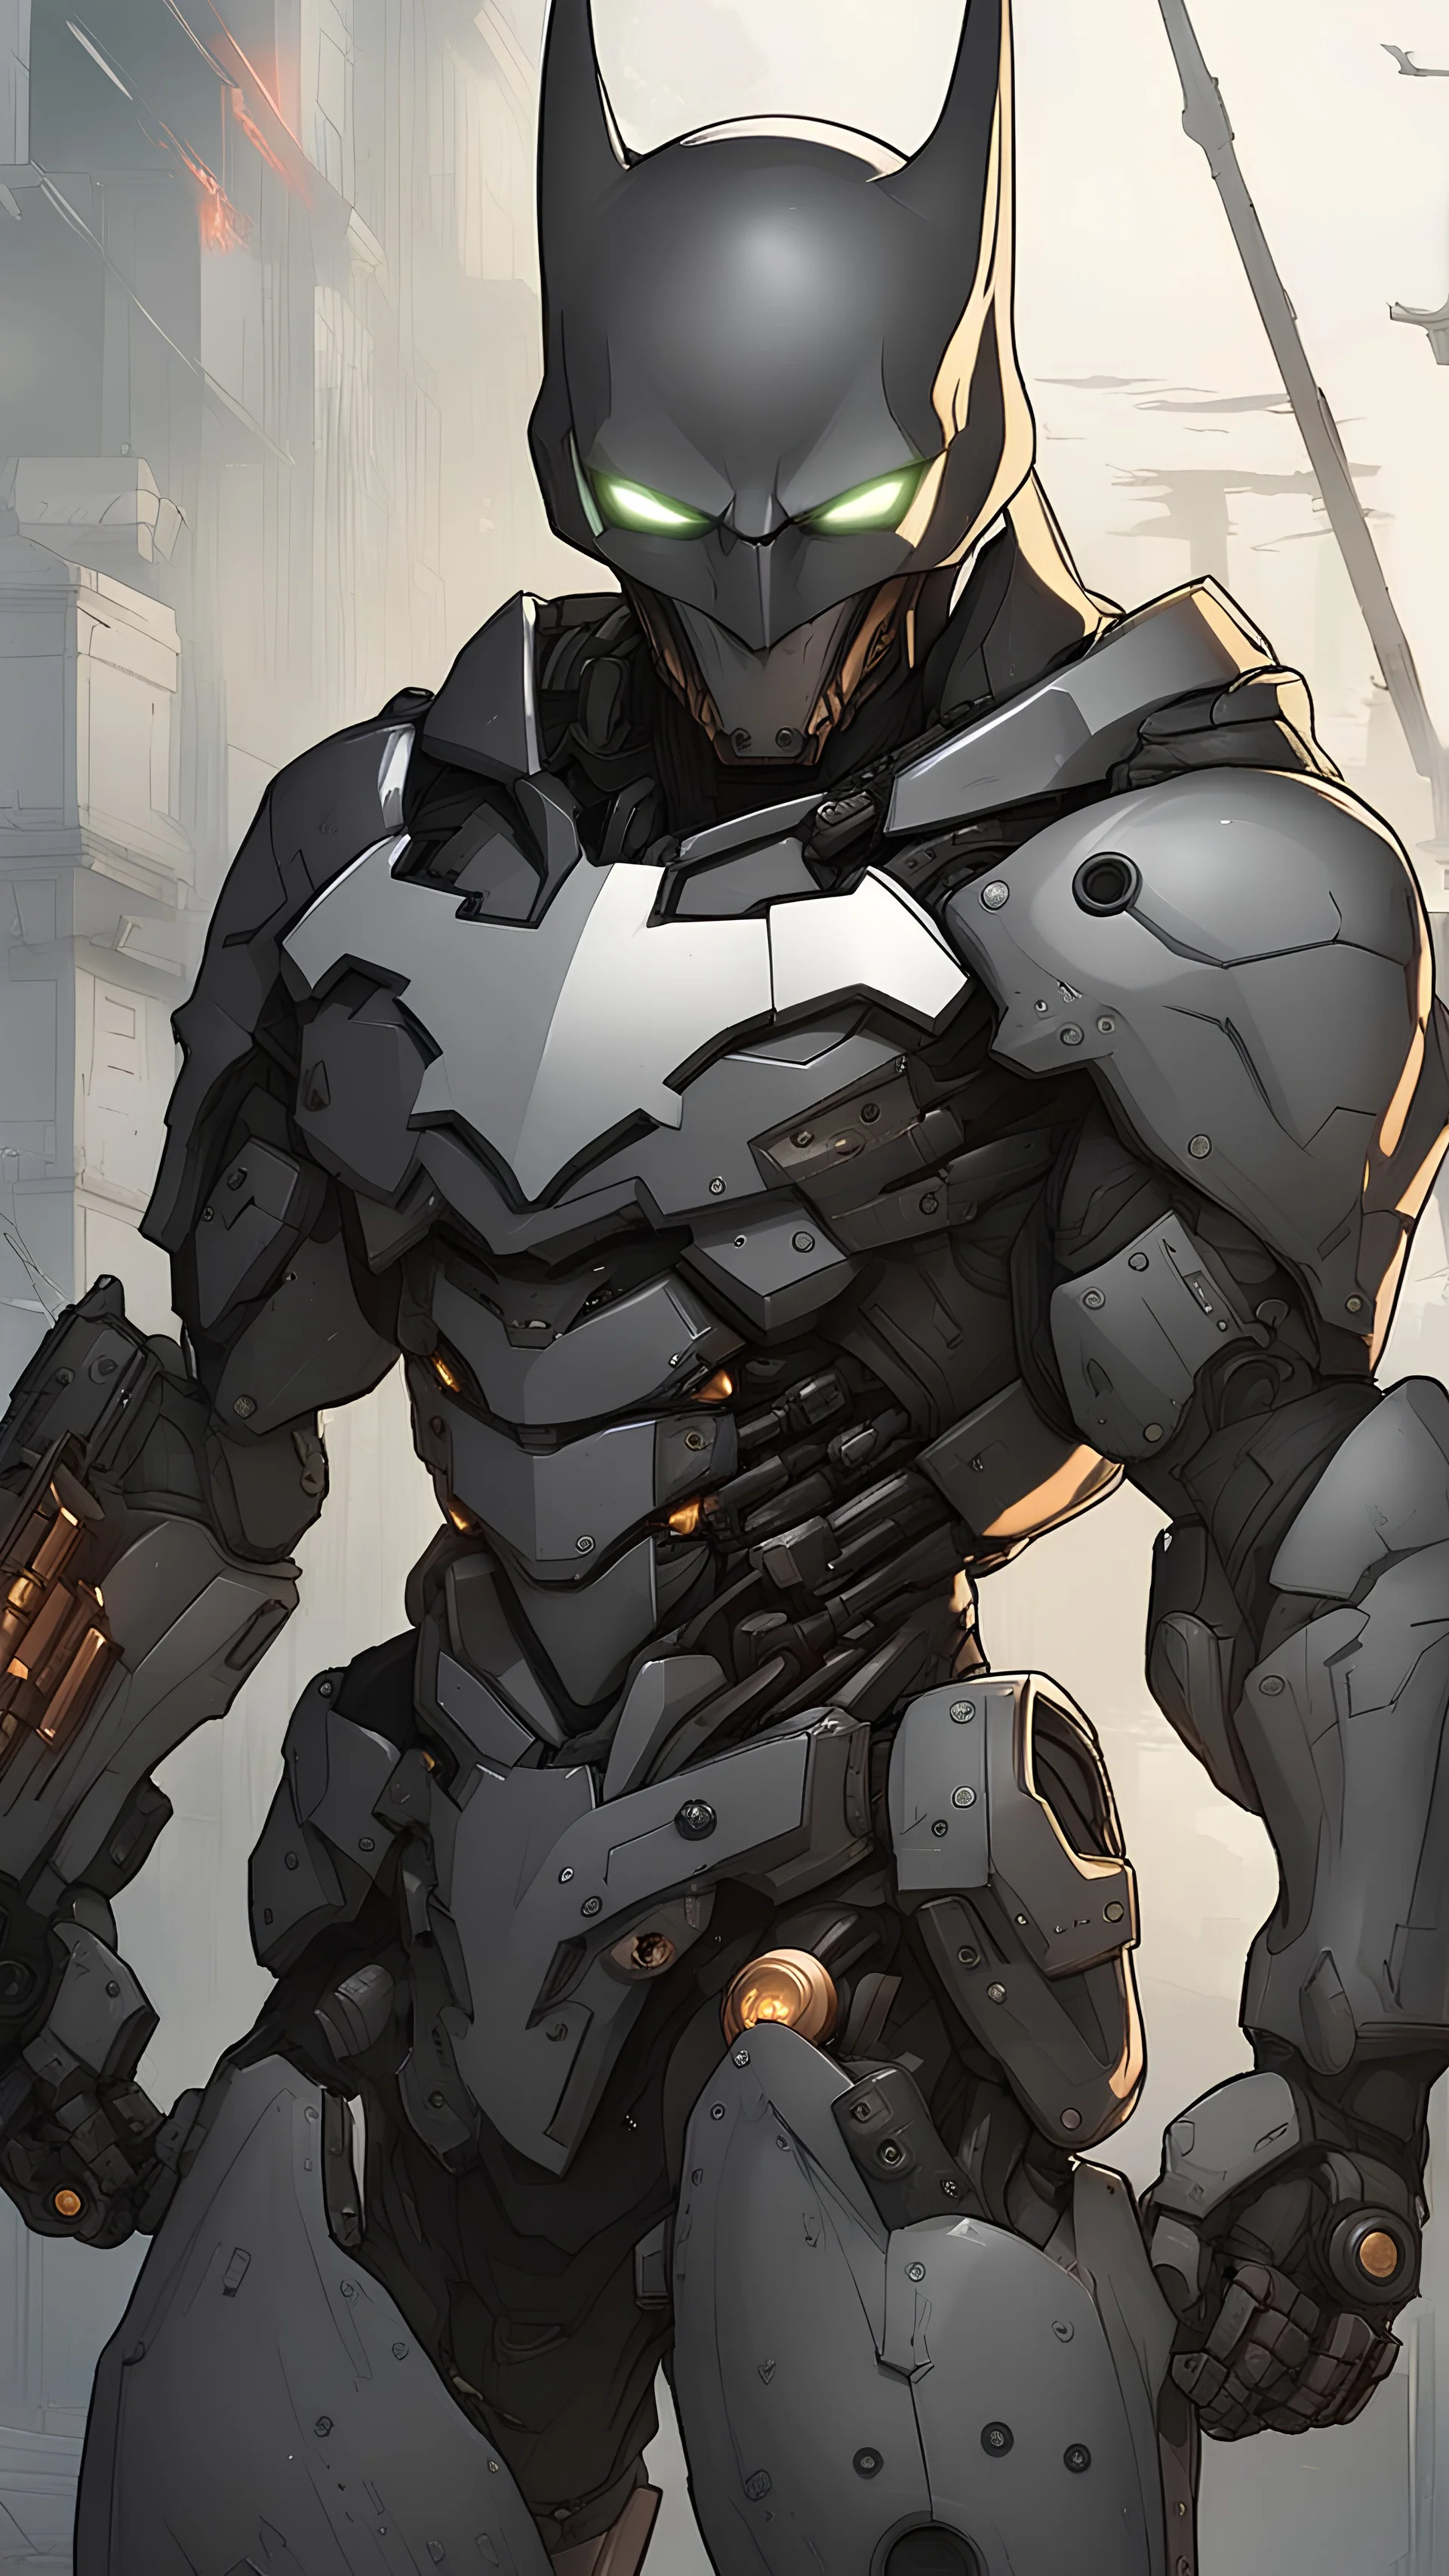 a close up of a person in a batman suit, venomized, goth cybersuit, anime mech armor, overwatch character concept art, cyber skeleton, cyber japan armor, cyber fight armor, cyberpunk batman, hard surface character pinterest, reaper from overwatch, black heavy armor, mecha anthropomorphic penguin, mecha suit, batman mecha, muscular! cyberpunk